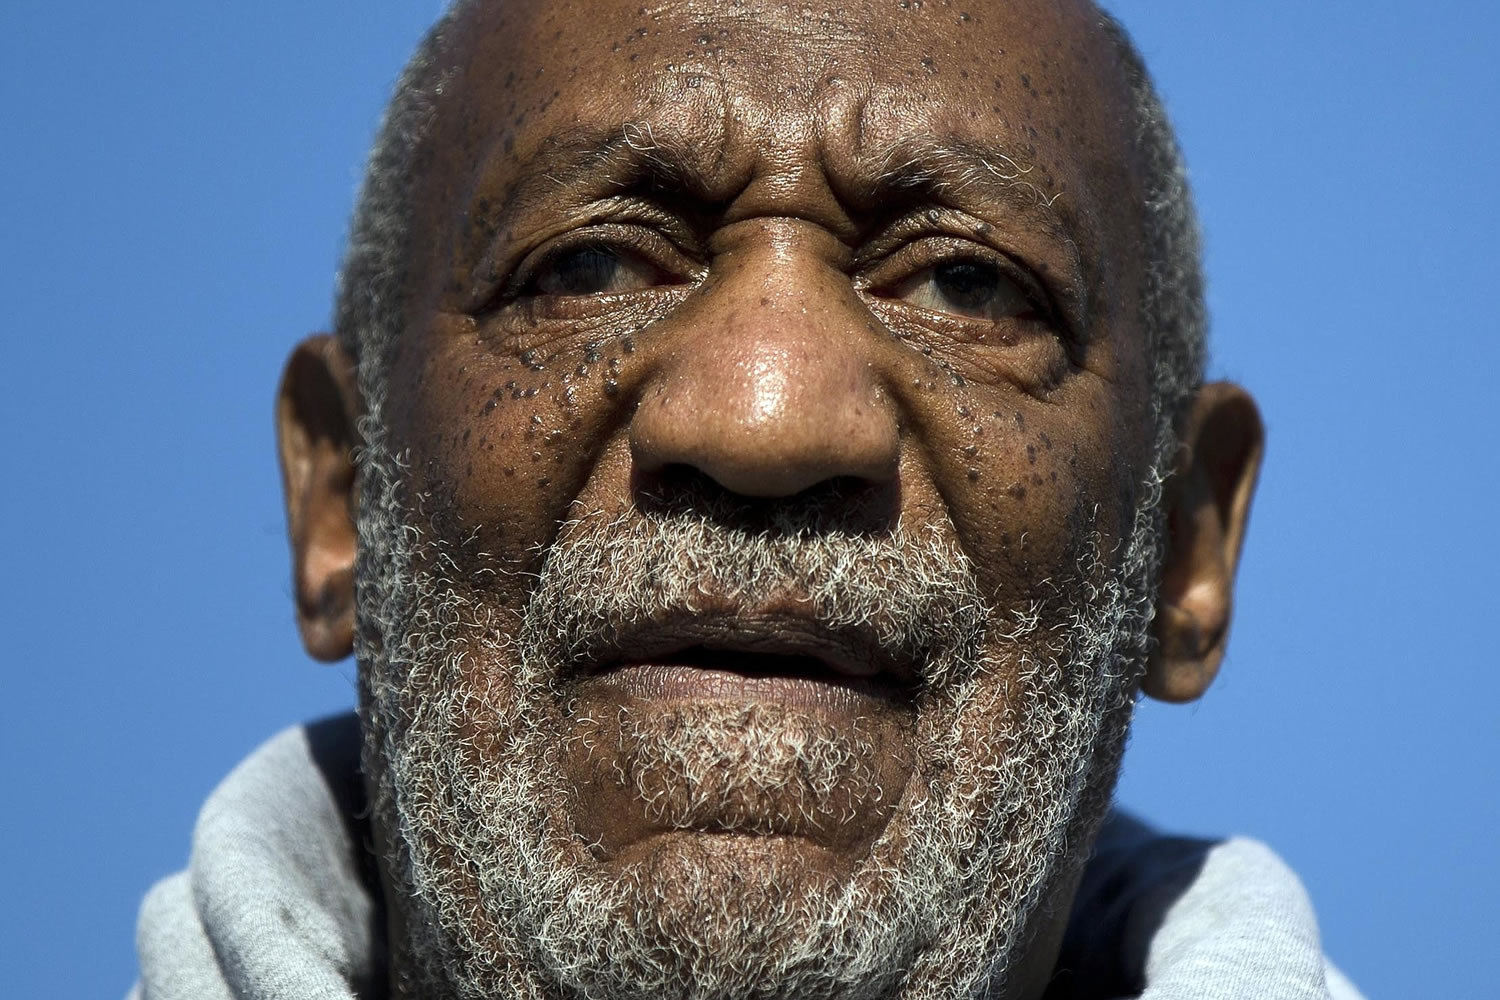 Bill Cosby says he paid women after having sex and went to great lengths to hide his behavior and the payments from his wife, The New York Times reported Saturday.